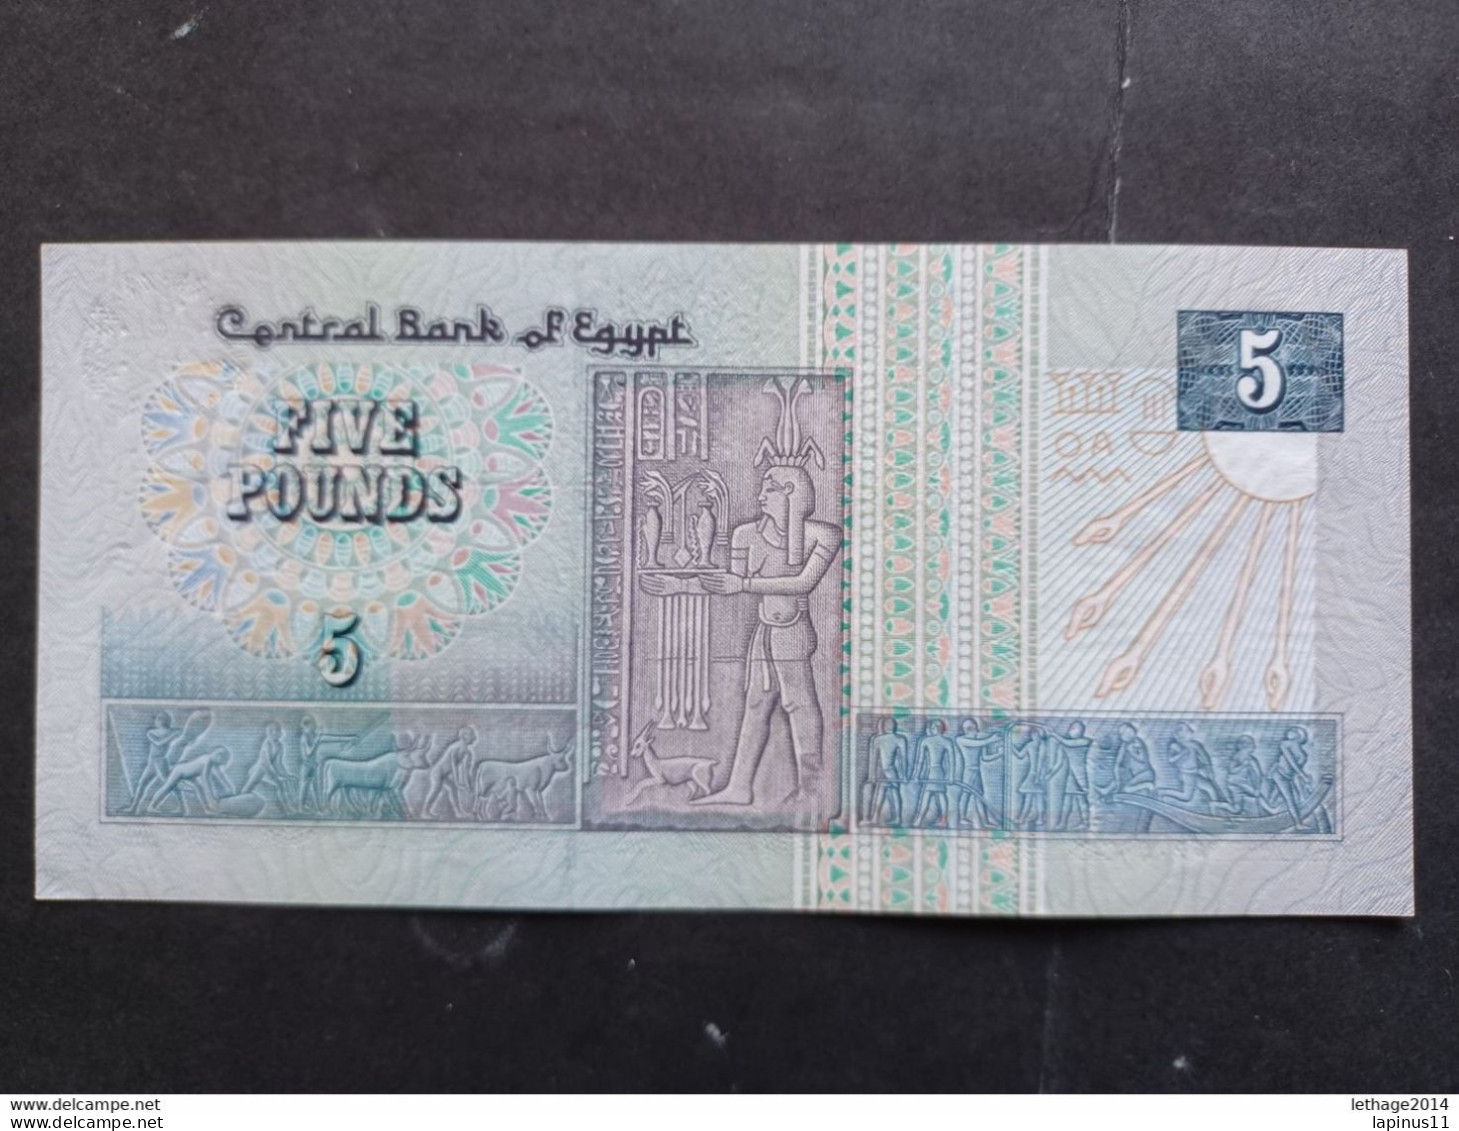 BANKNOTE EGYPT EGYPT 5 POUNDS 1993 UNCIRCULATED - Egypte